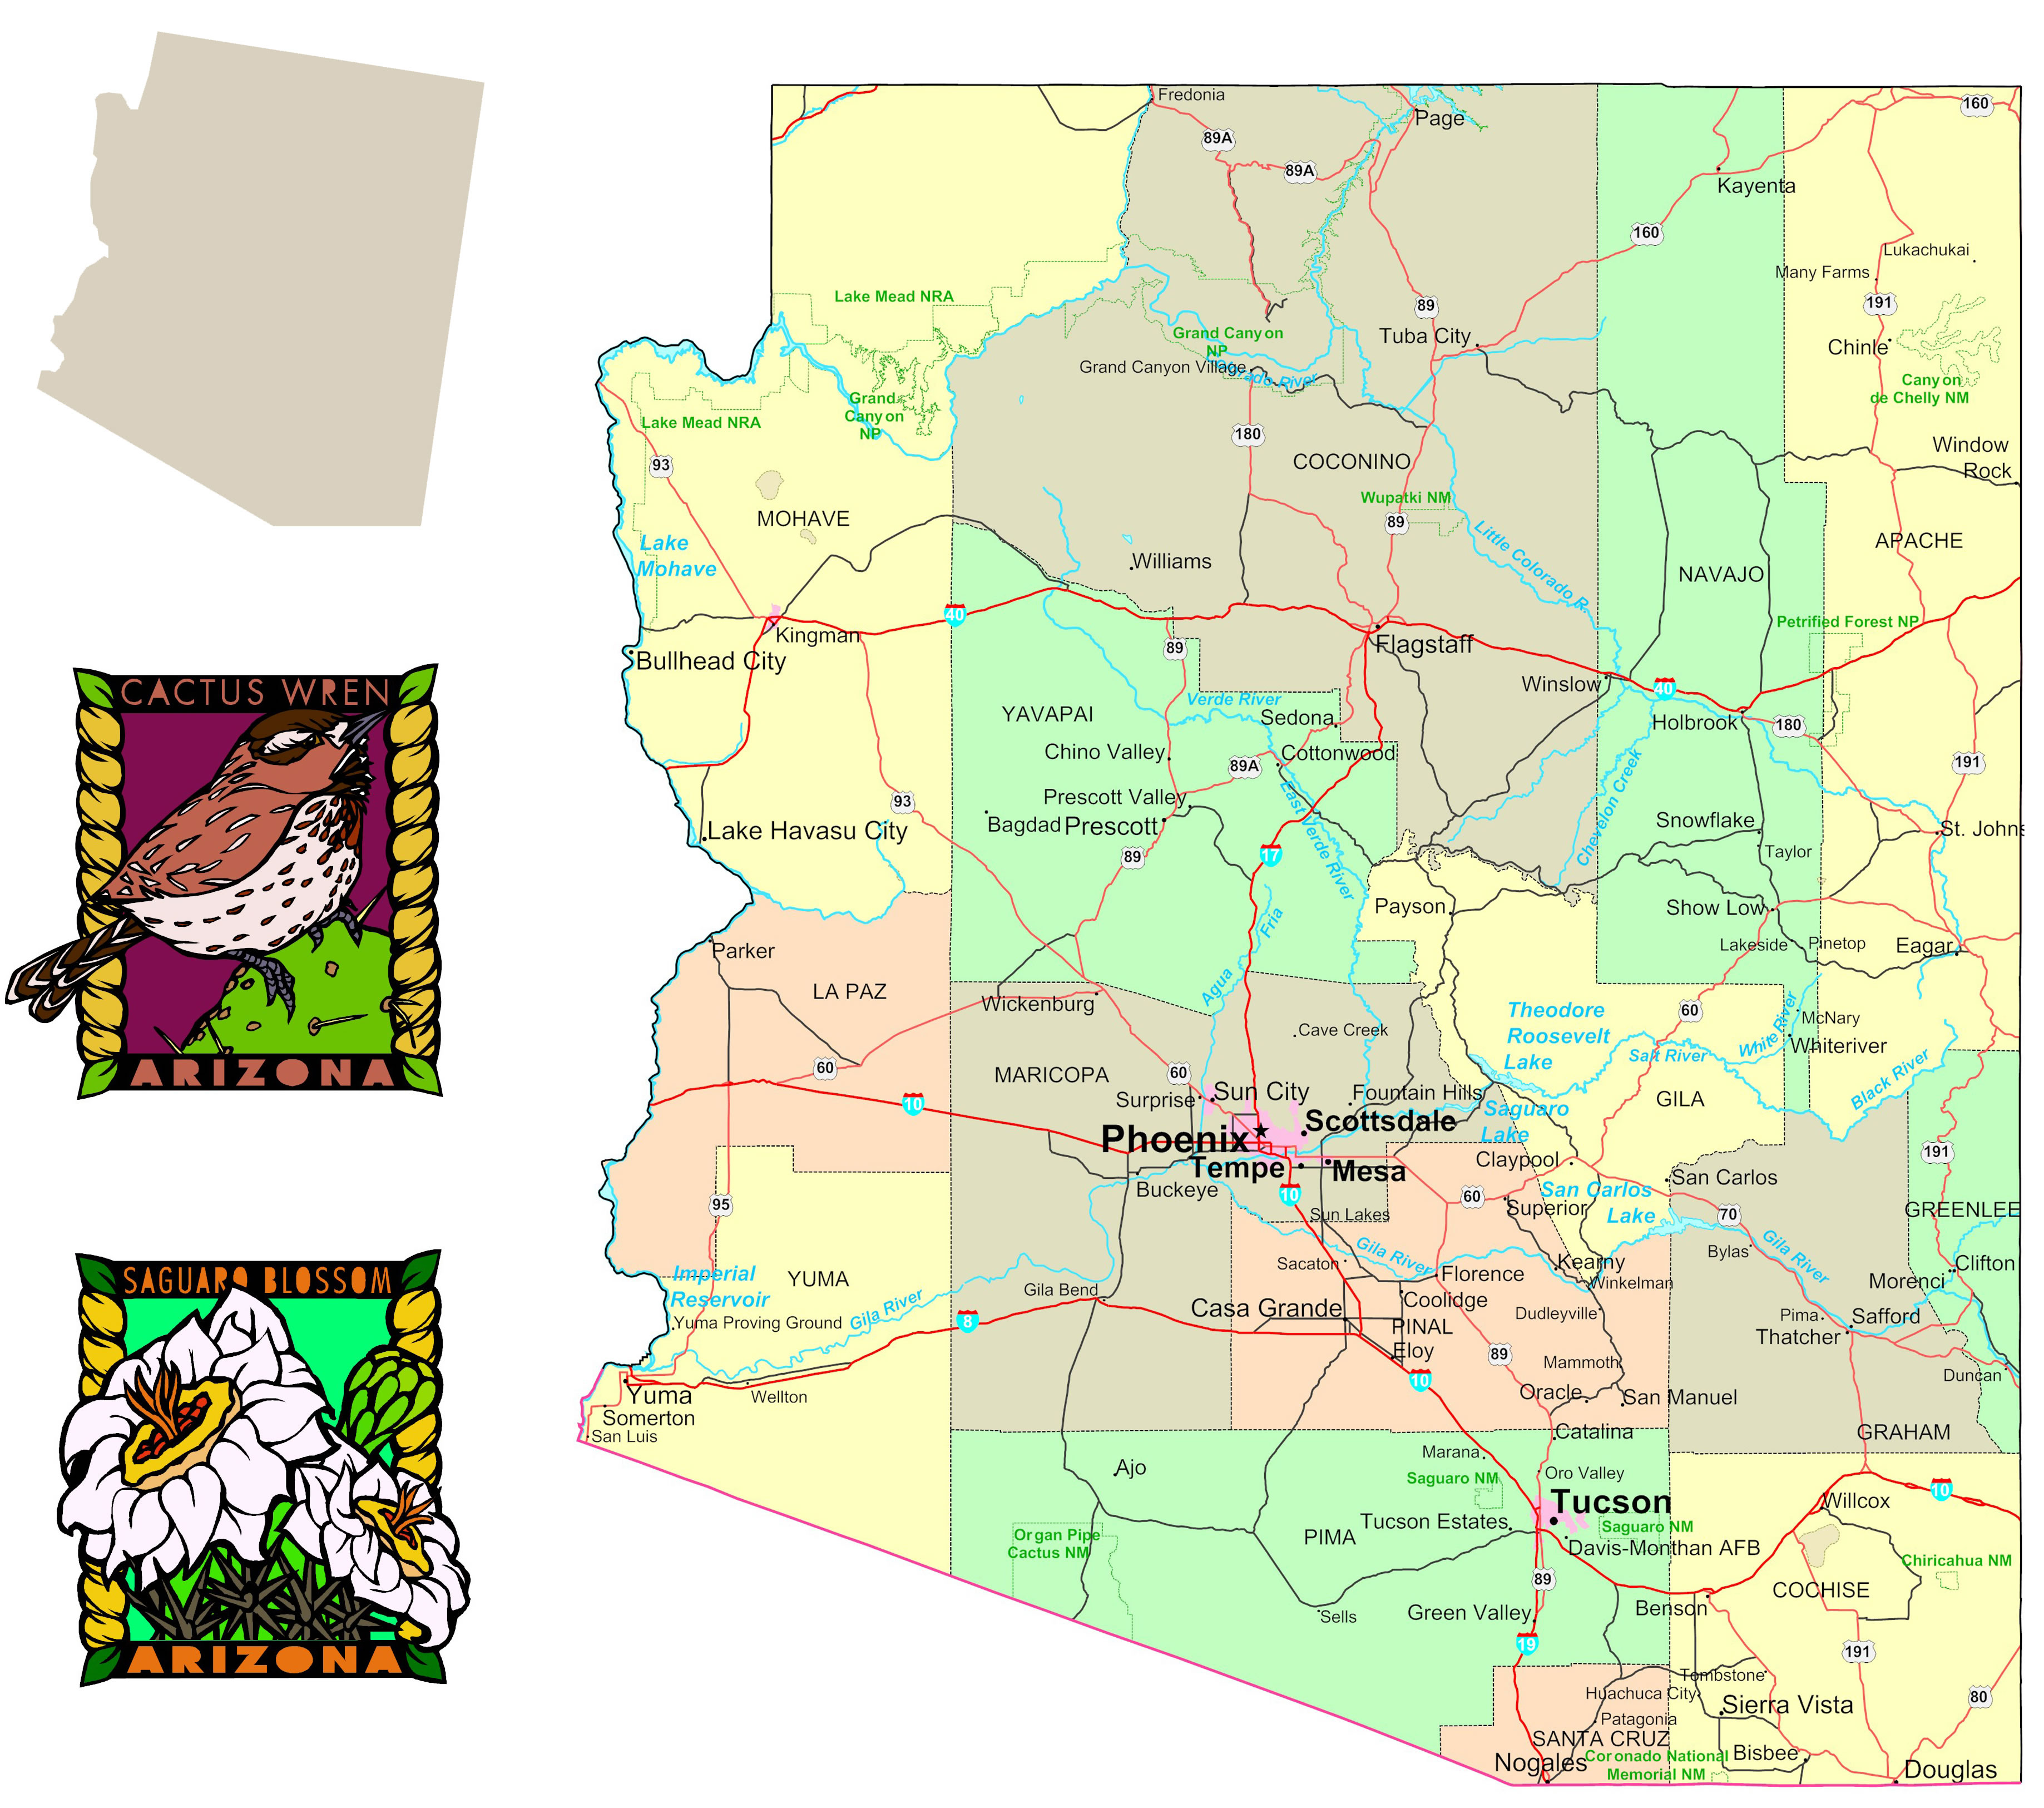 Arizona political map with counties